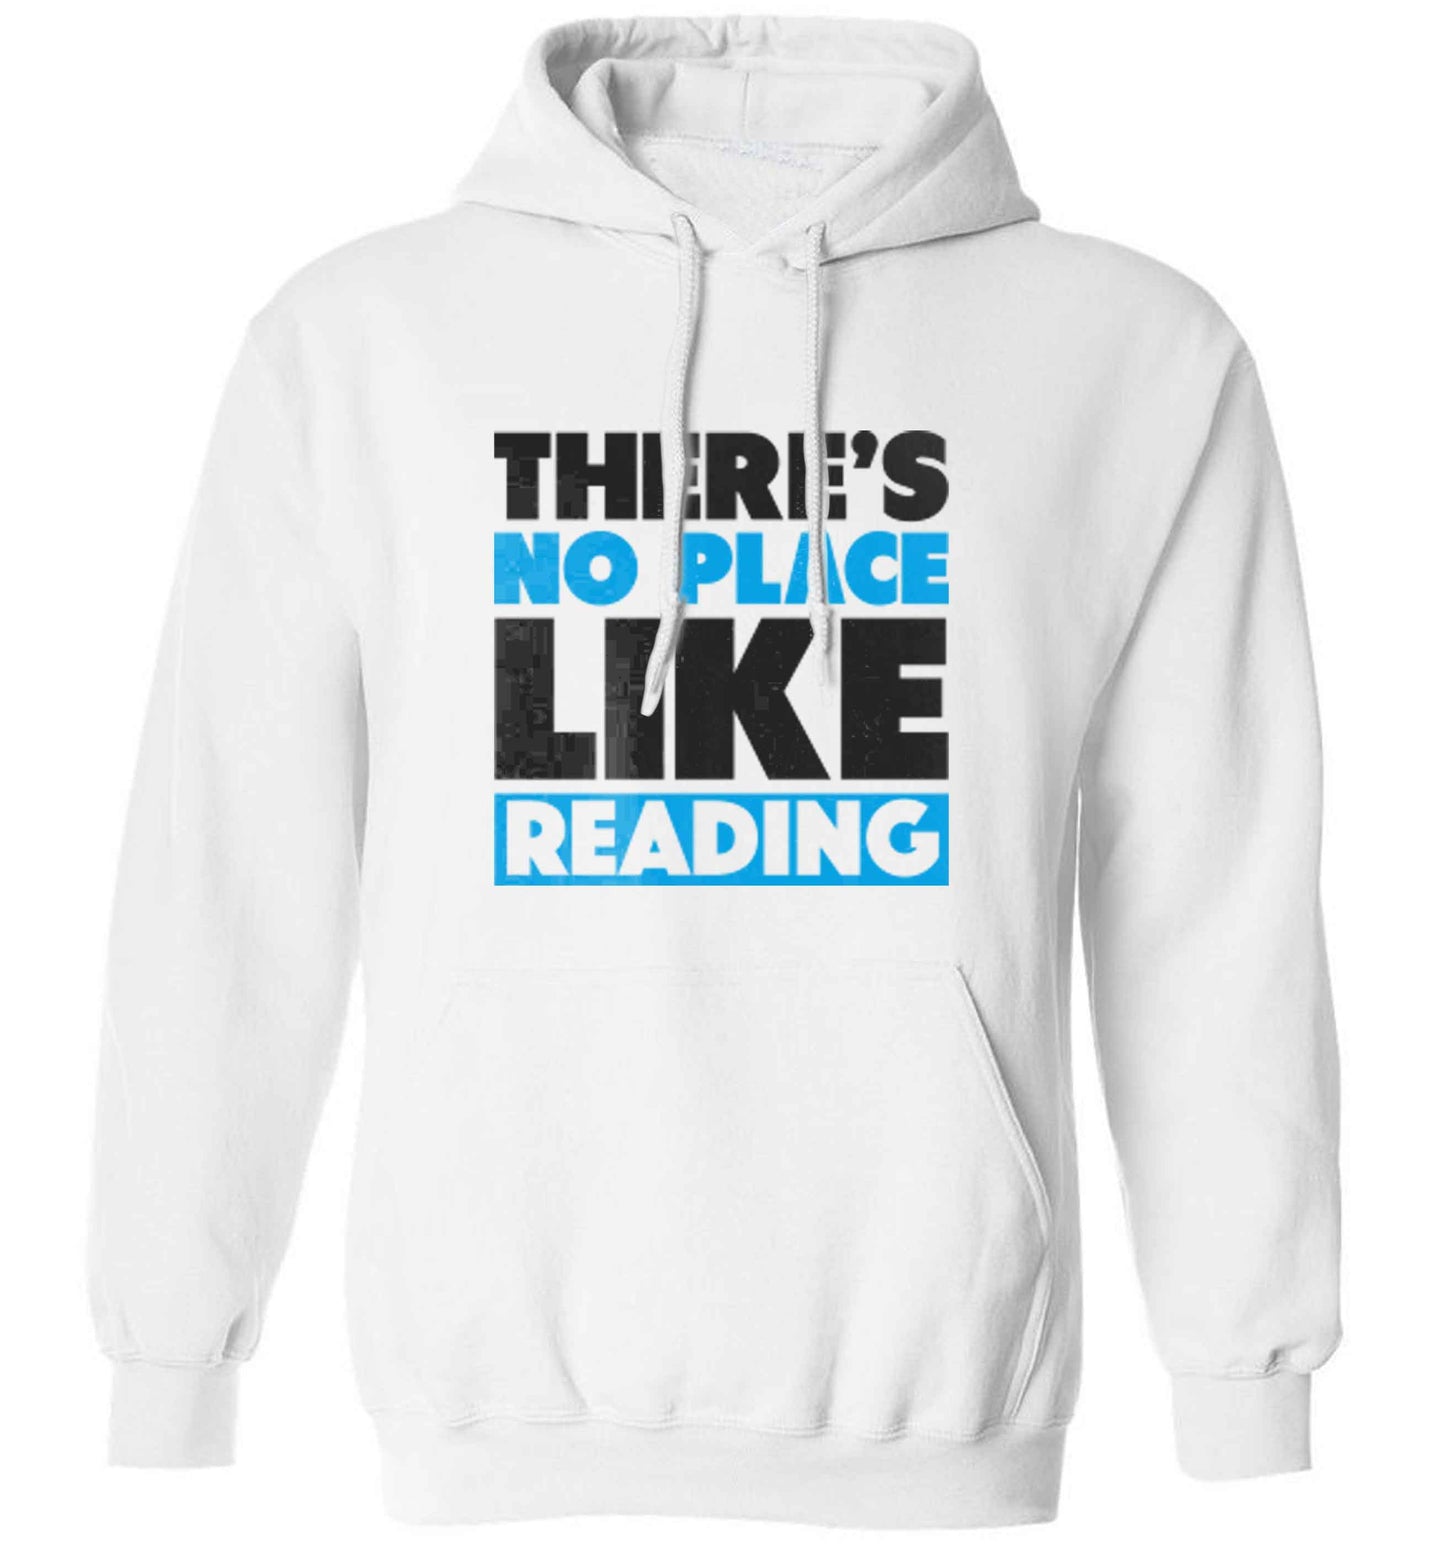 There's no place like Readingadults unisex white hoodie 2XL